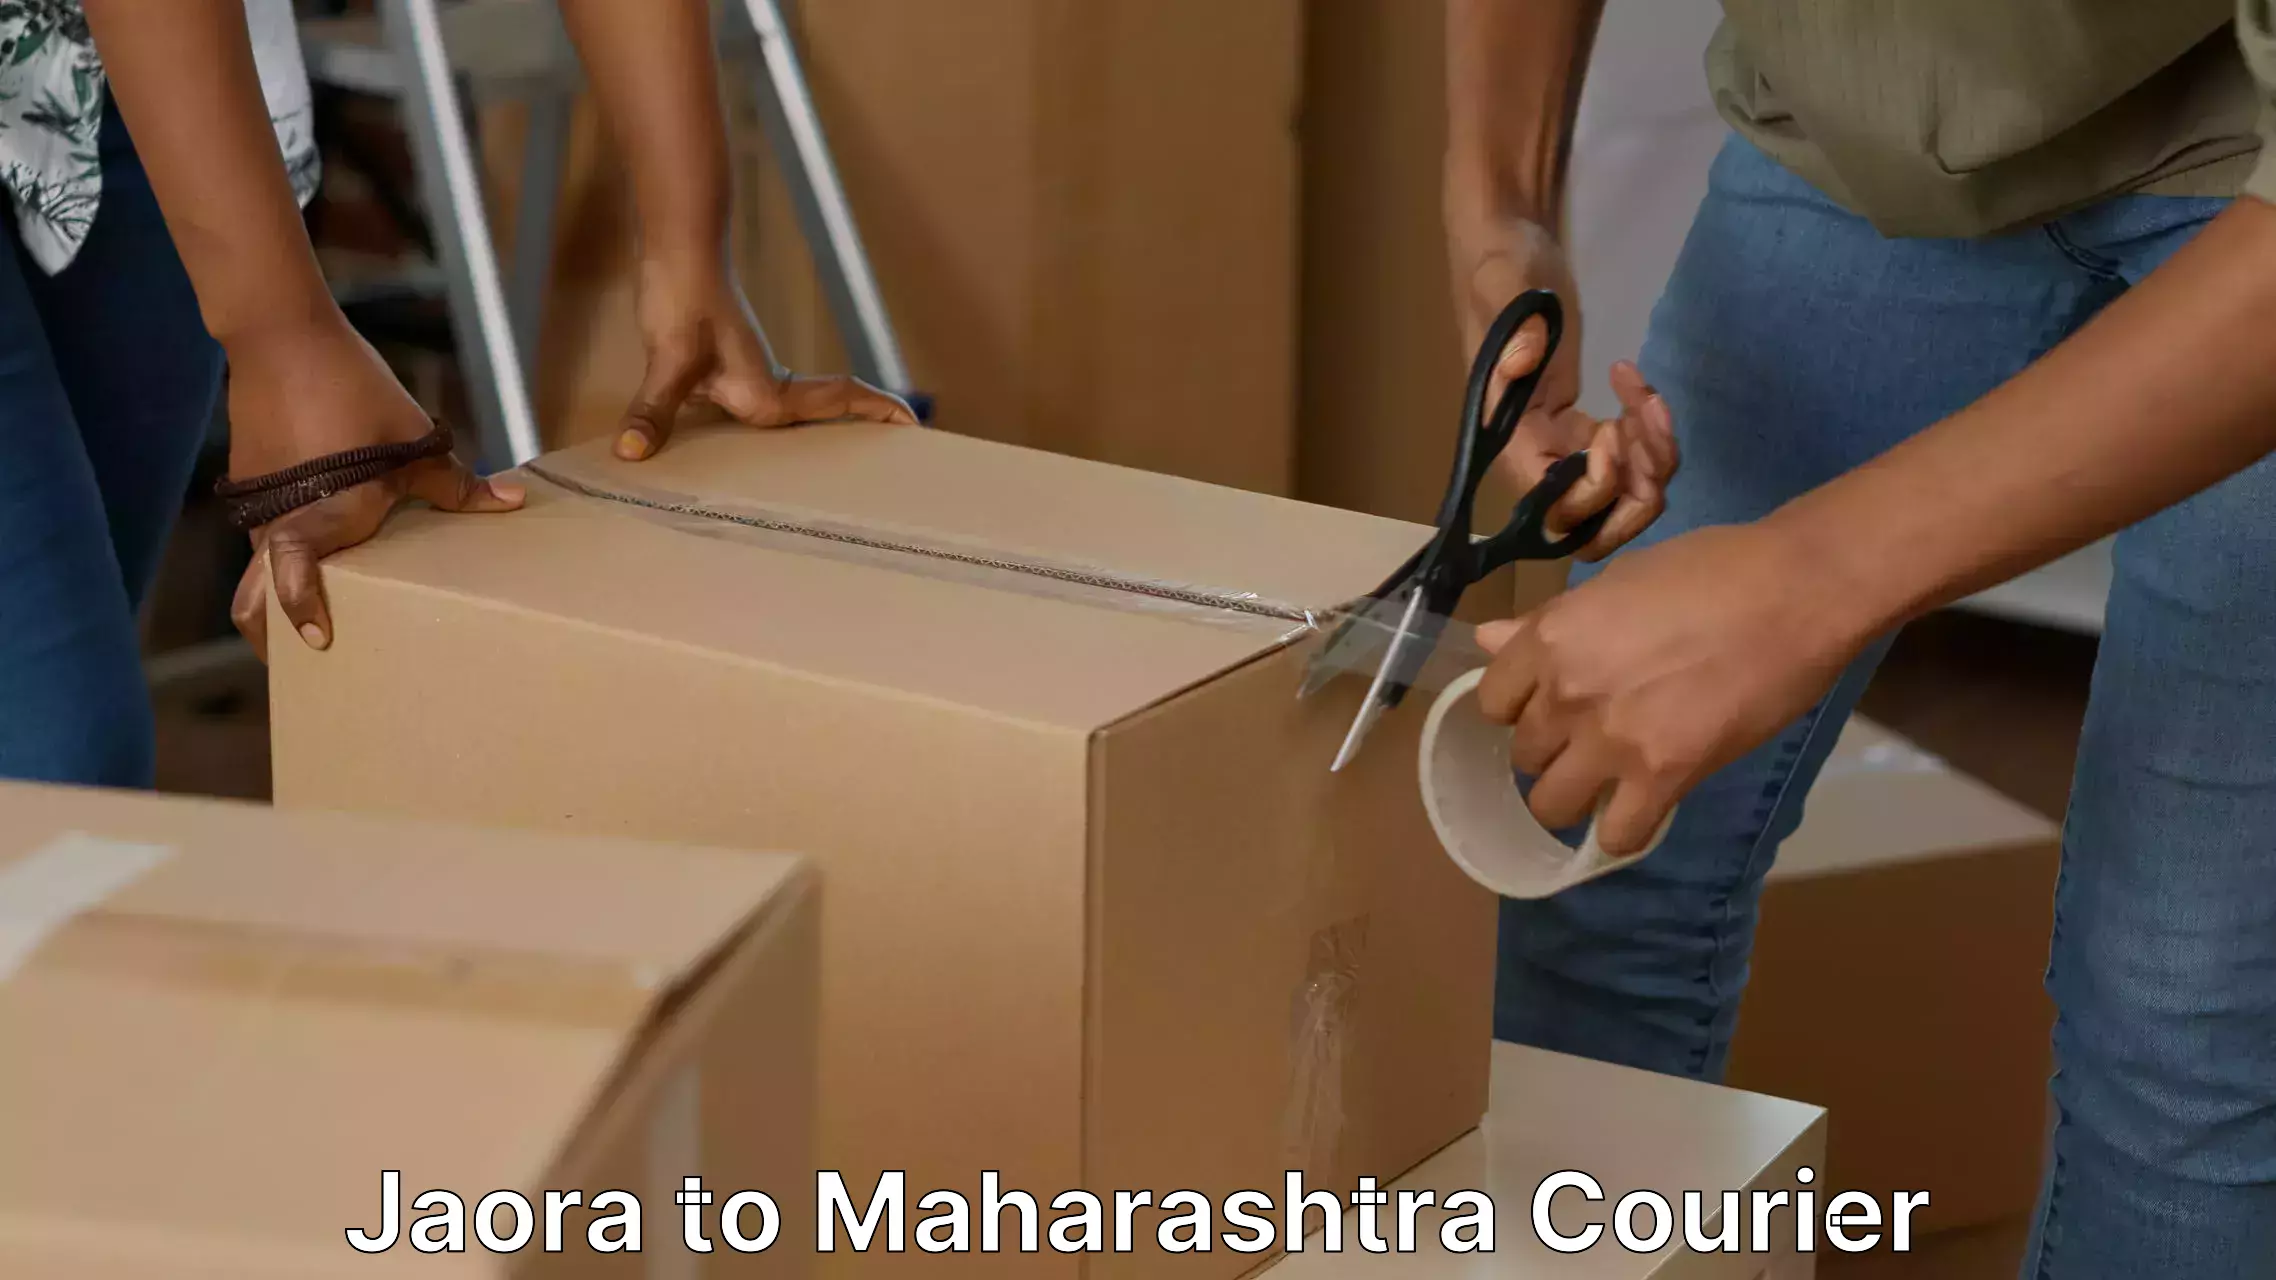 Furniture moving assistance Jaora to Nanded